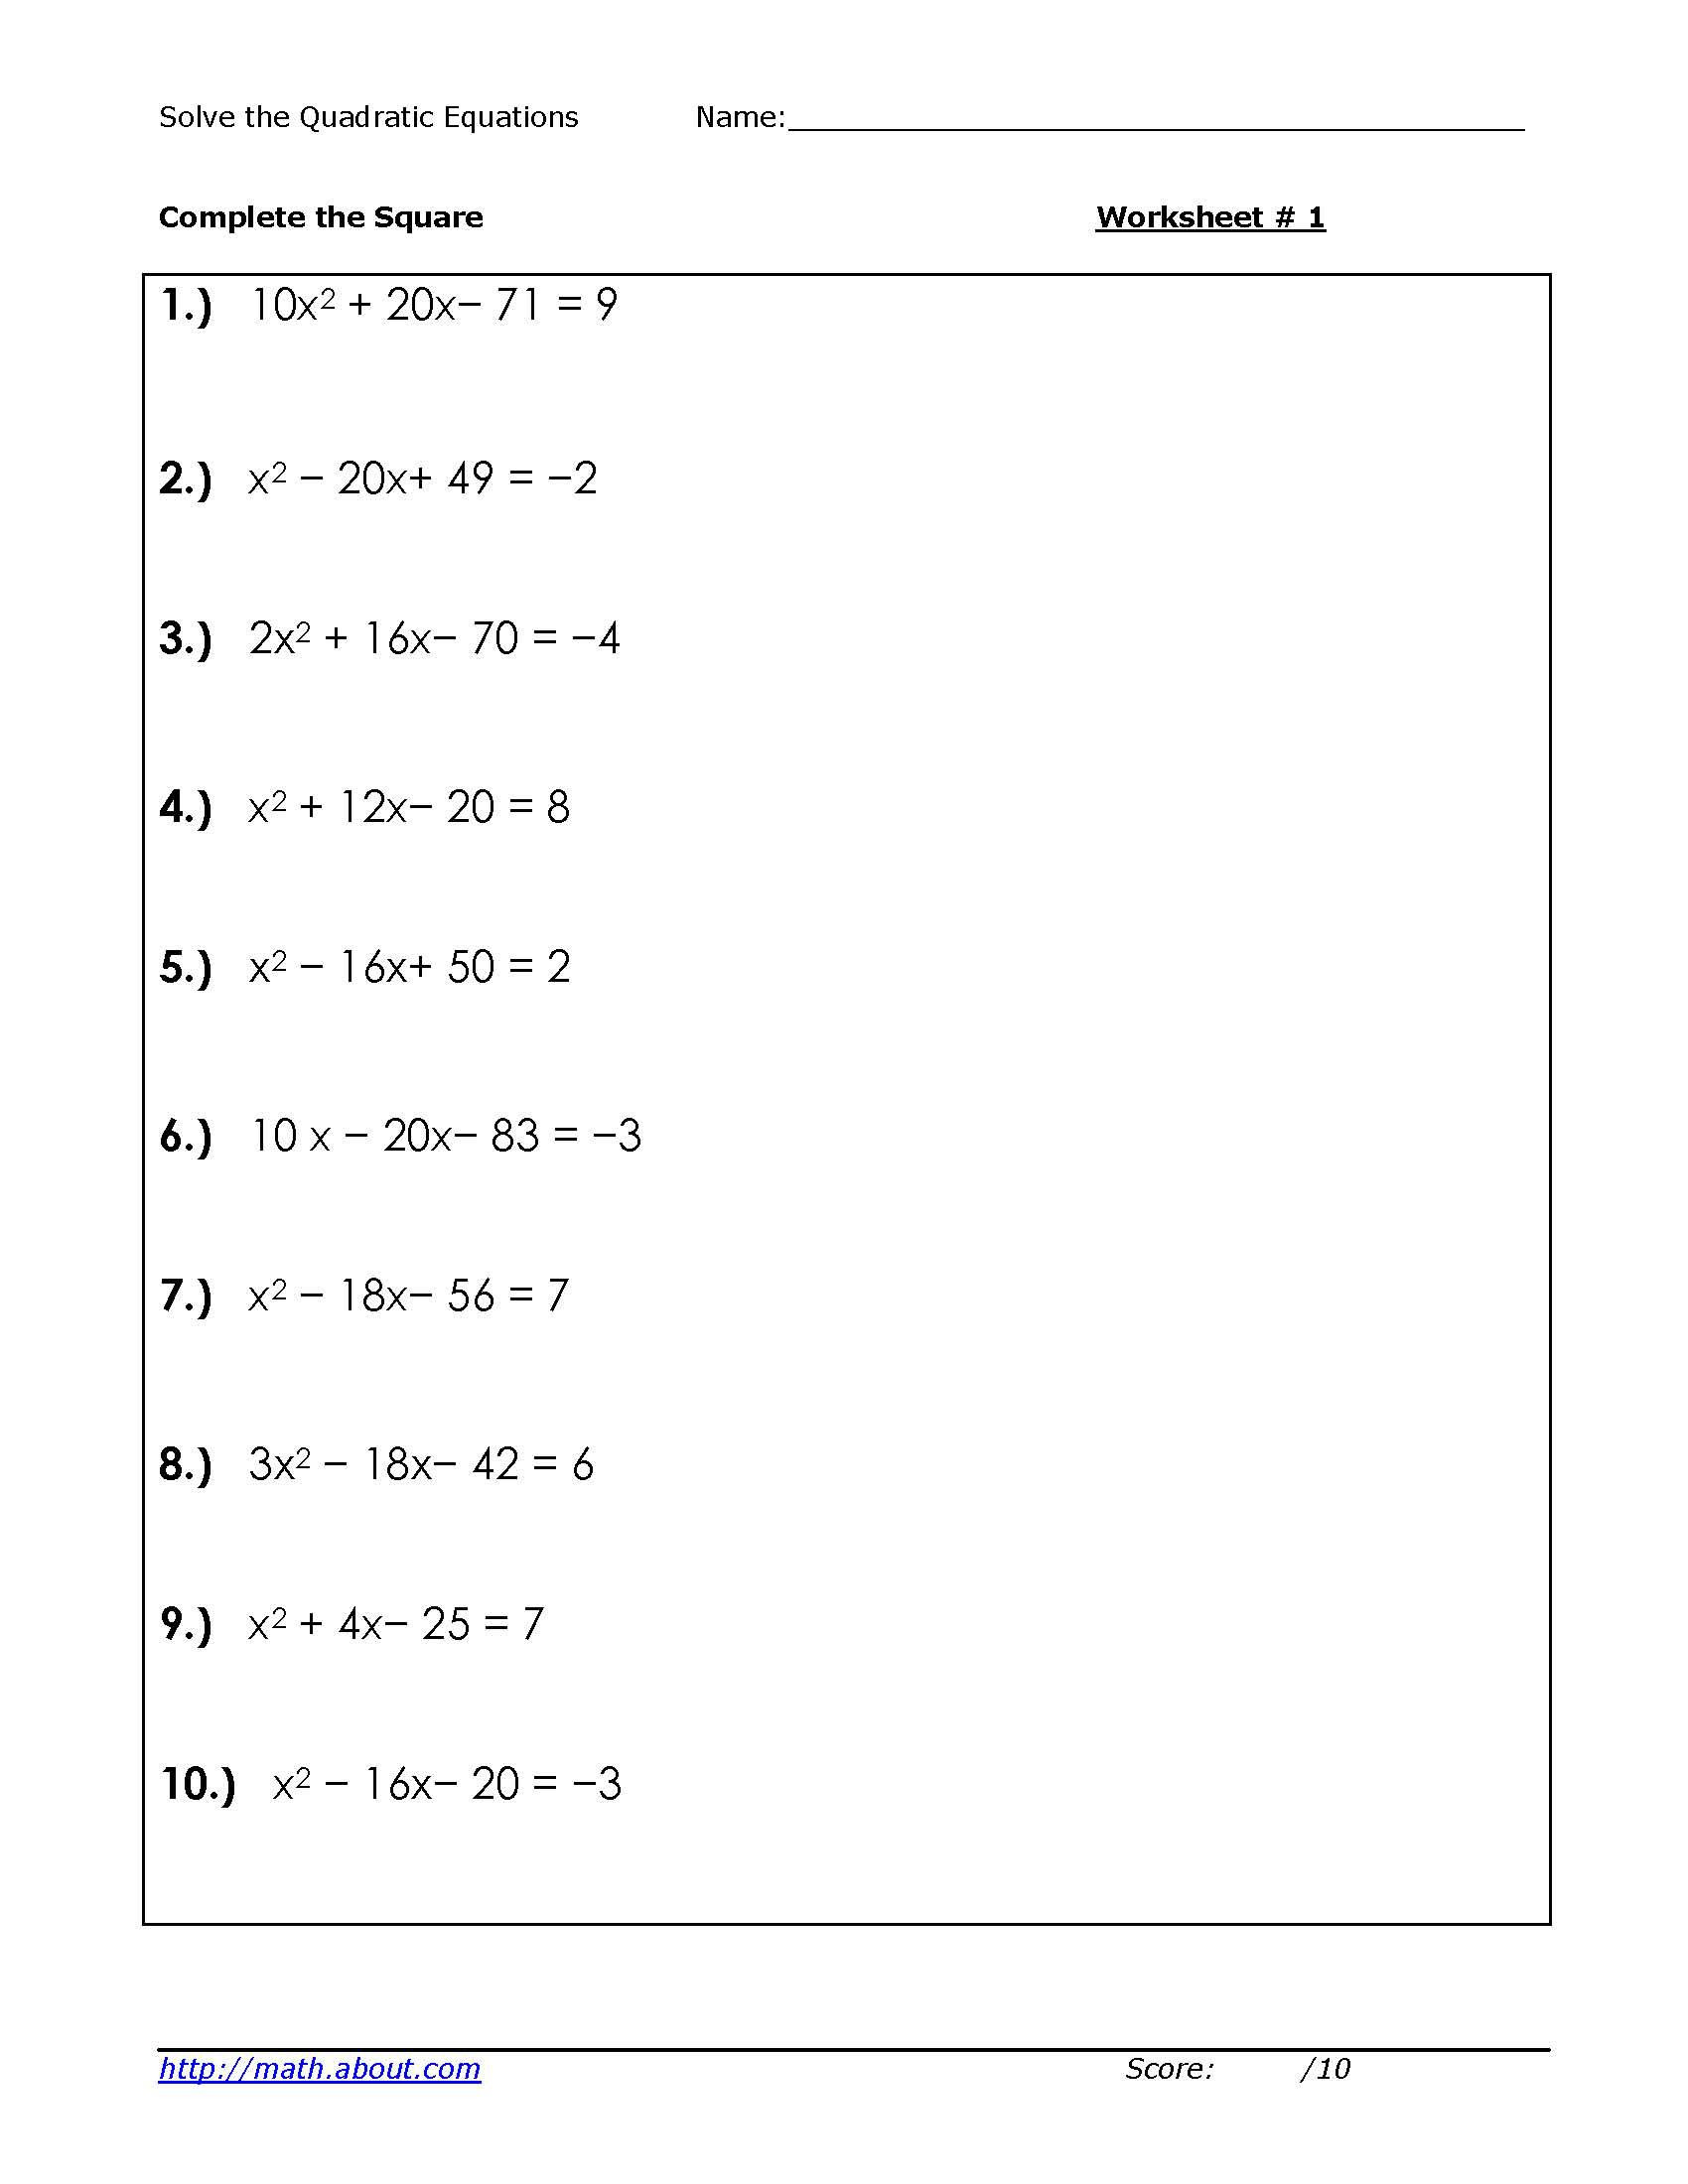 Algebra 2 Factoring Worksheet solve Quadratic Equations by Peting the Square Worksheets